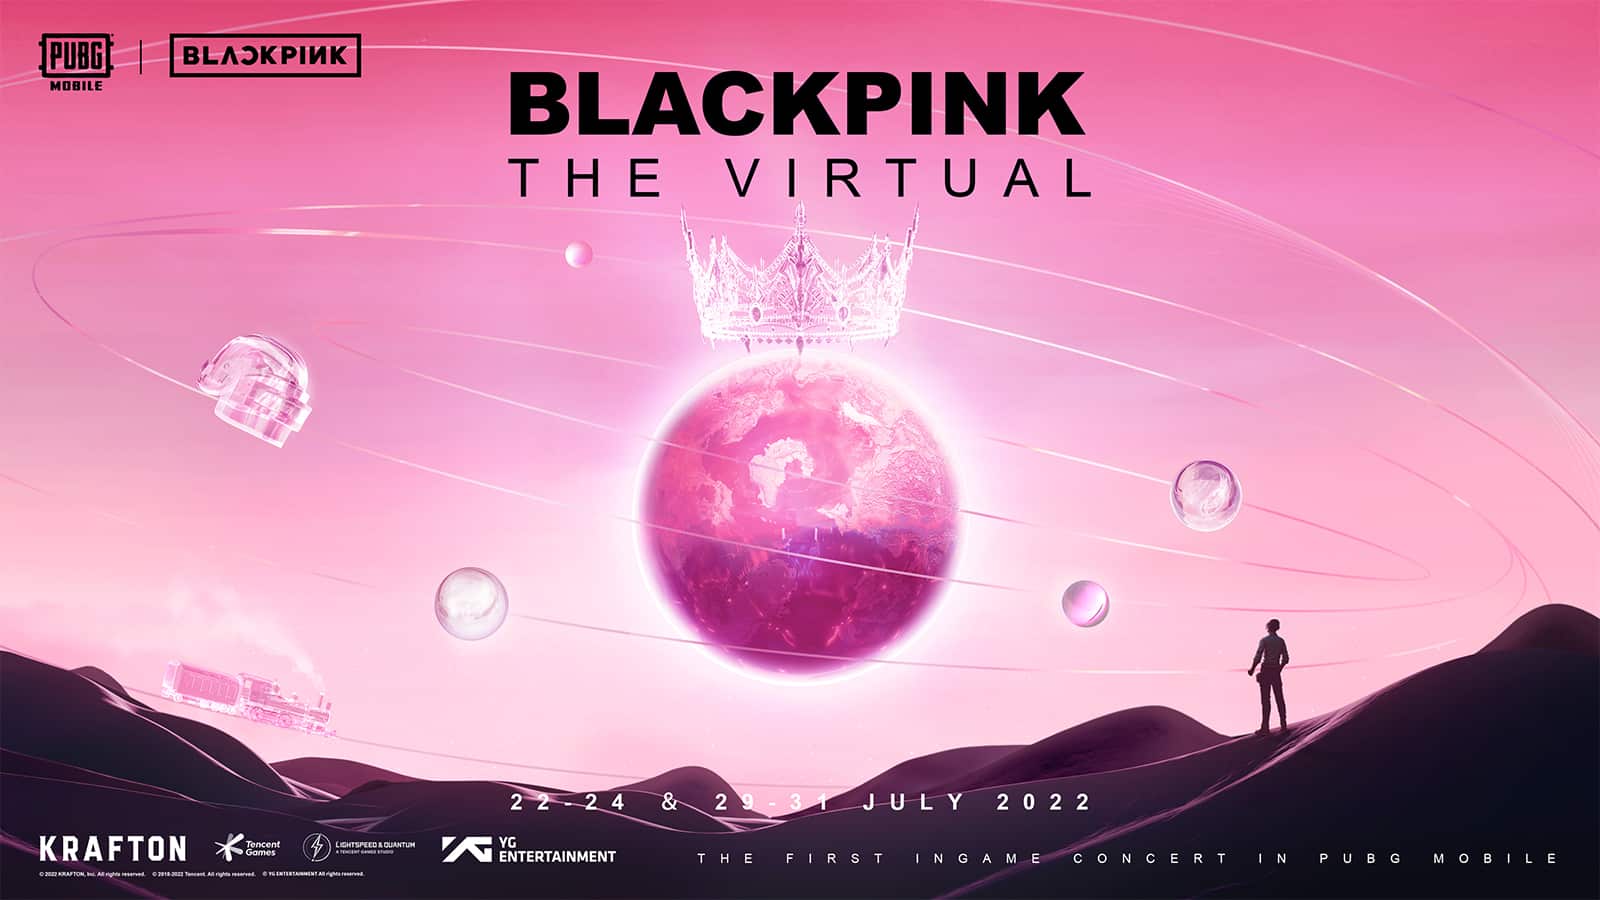 A poster for the BLACKPINK PUBG Mobile concert